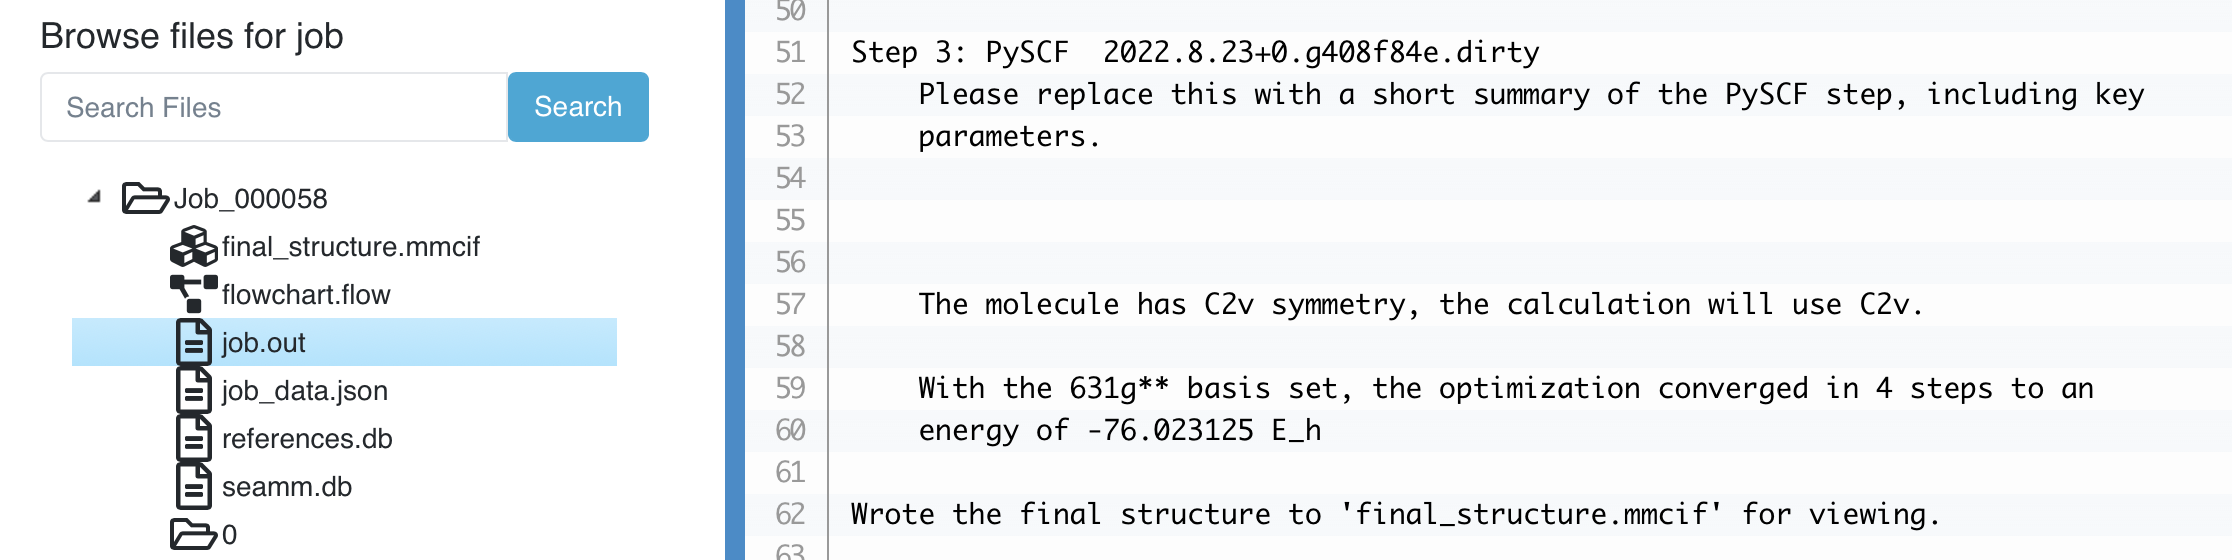 The output from running PySCF on water